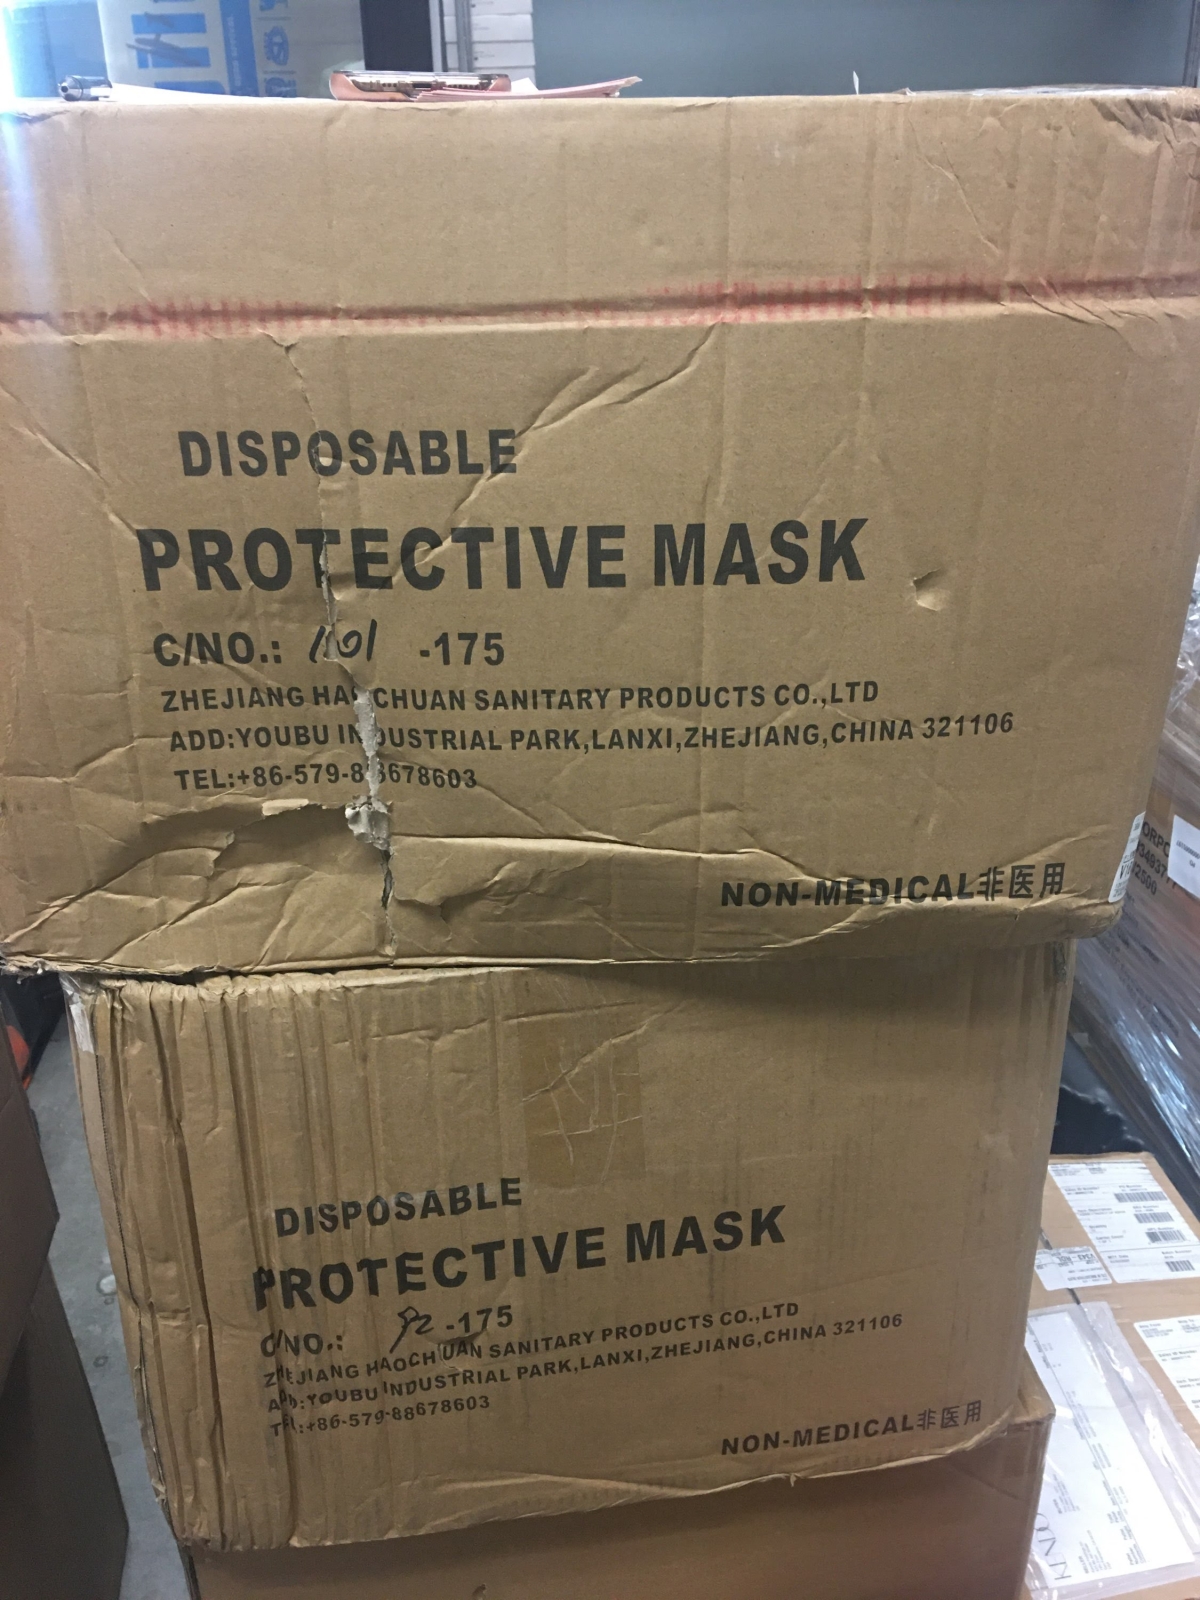 Kaiser Permanente Oakland Medical Center receives mask donation made by Kelly Yang